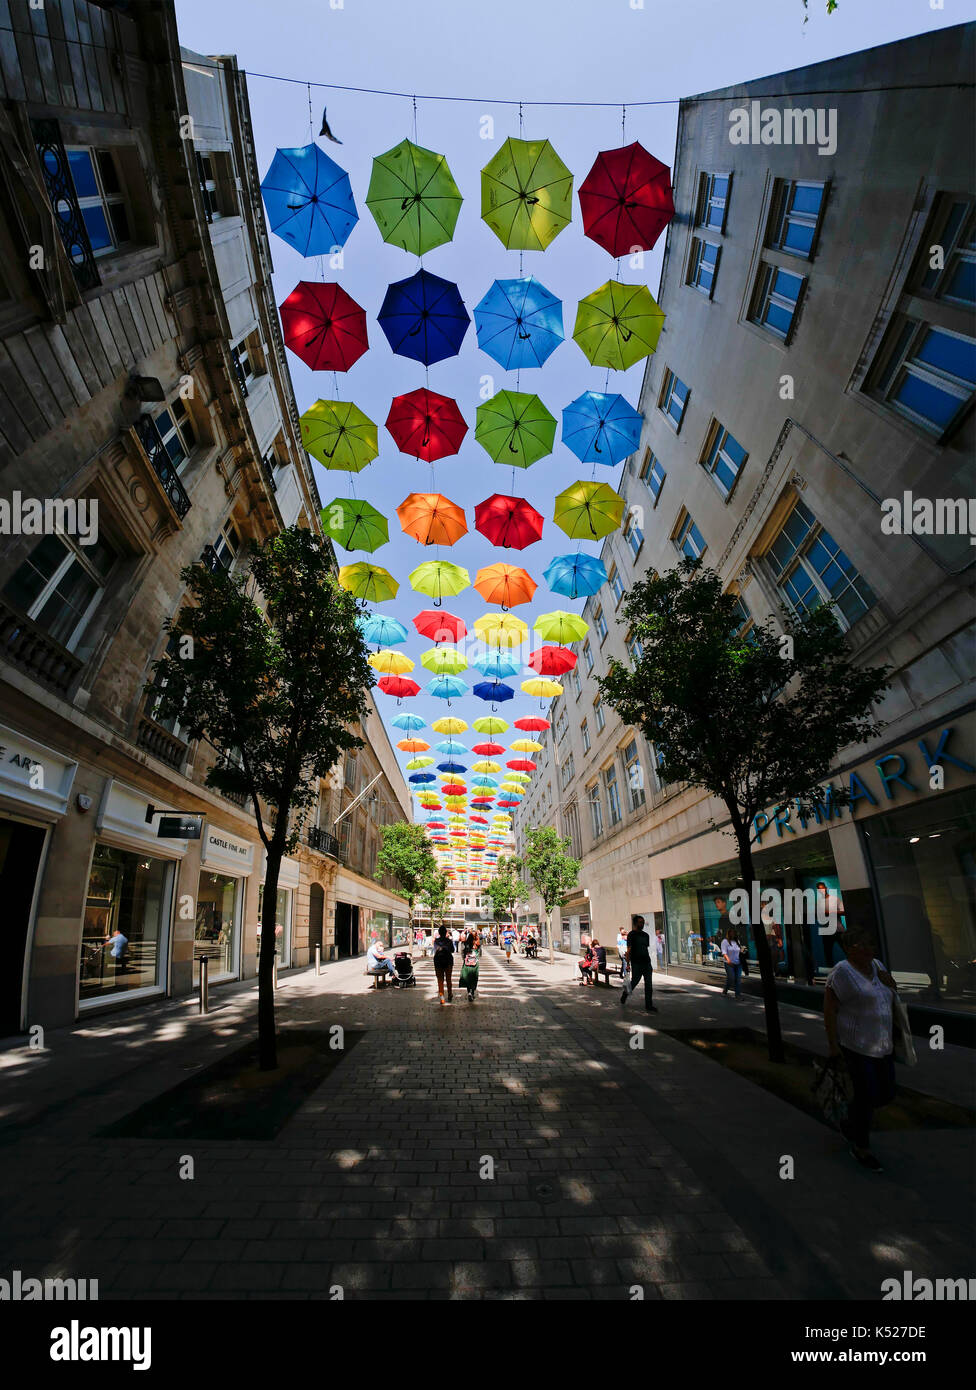 Umbrella Project art installation using 200 colourful brollies in Church Alley, Liverpool. Created to celebrate 10th anniversary of ADHD Foundation. Stock Photo